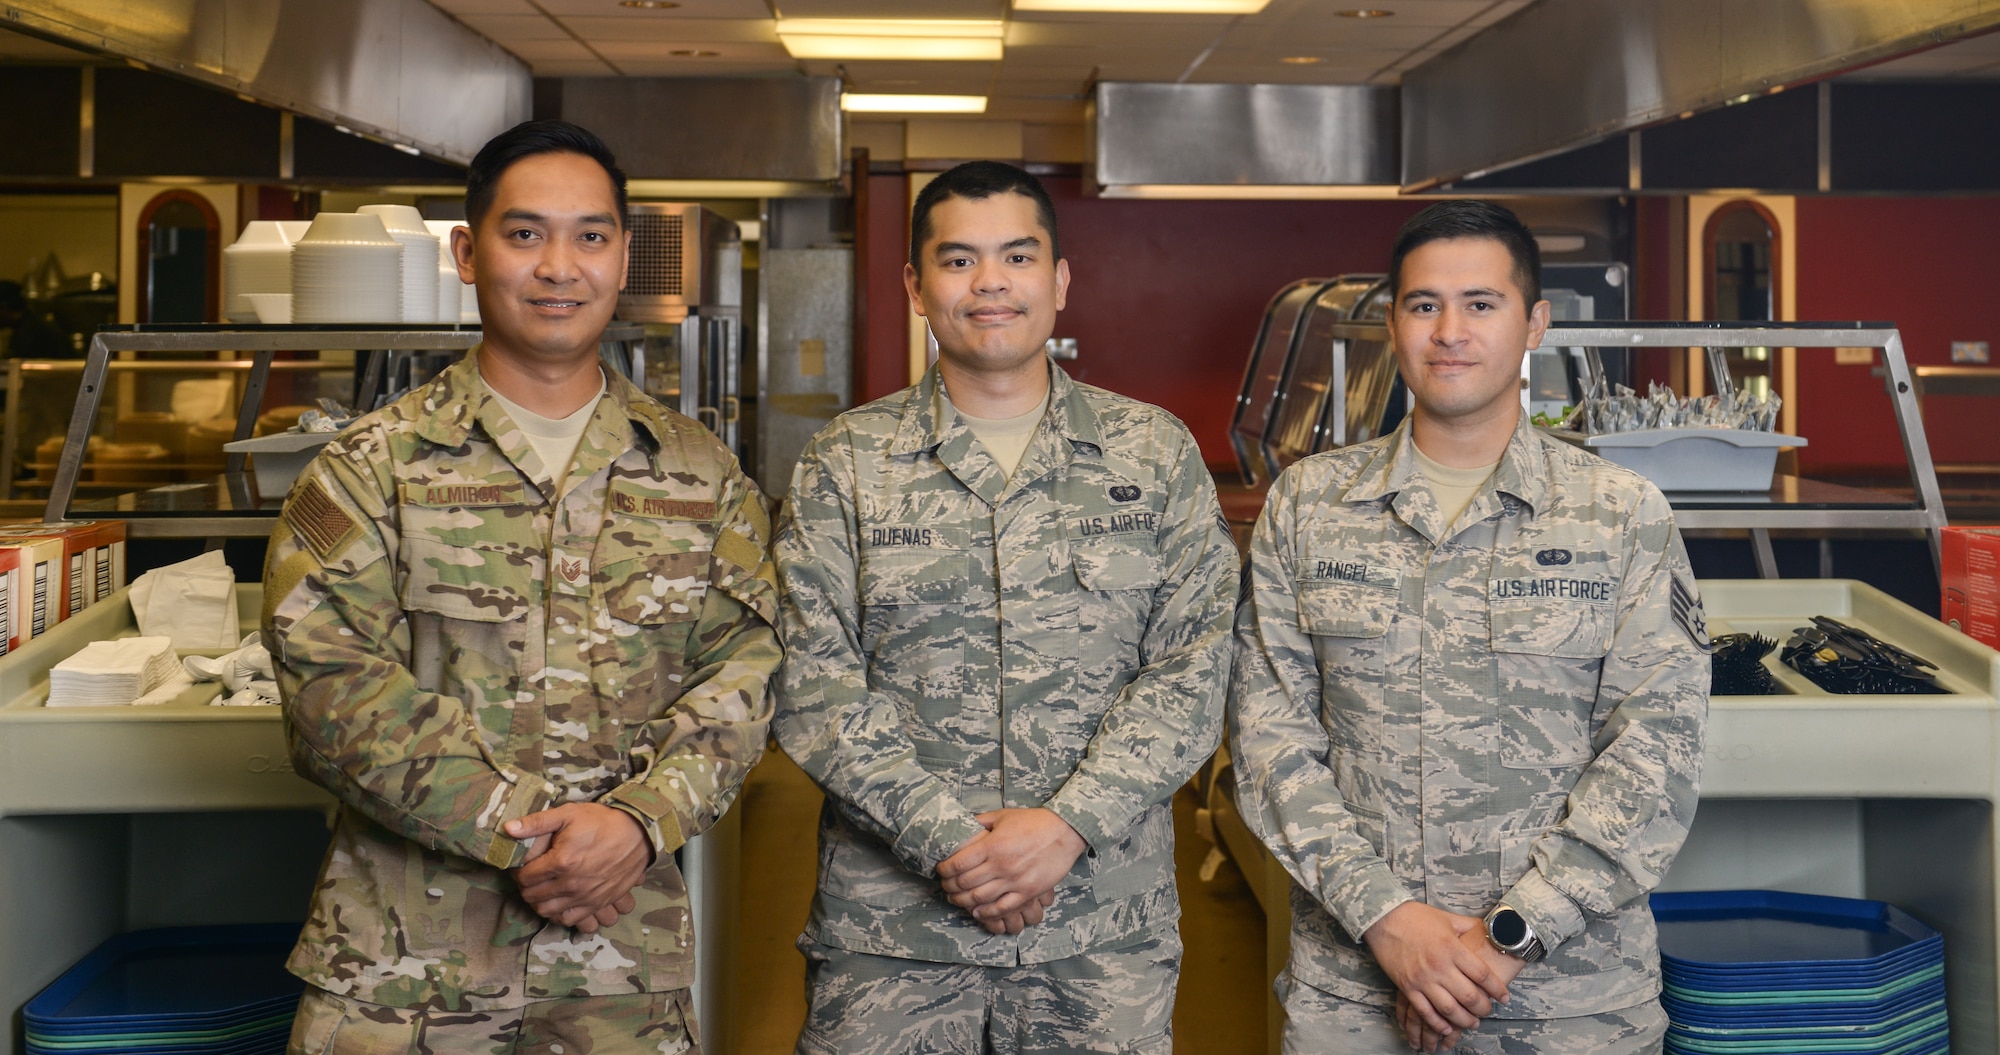 Technical Sergeant Flint Almiron, Staff Sergeant Jose Rangel, and Airman 1st Class Daniel Duenas, services Airmen assigned to the 509th Force Support Squadron, work in the dining facility at Royal Air Force Fairford, England, during the Bomber Task Force mission. These Airmen work as quality assurance and oversee the contract dining facility workers to ensure quantity and quality of the food served to Airmen during the Bomber Task Force Deployment.